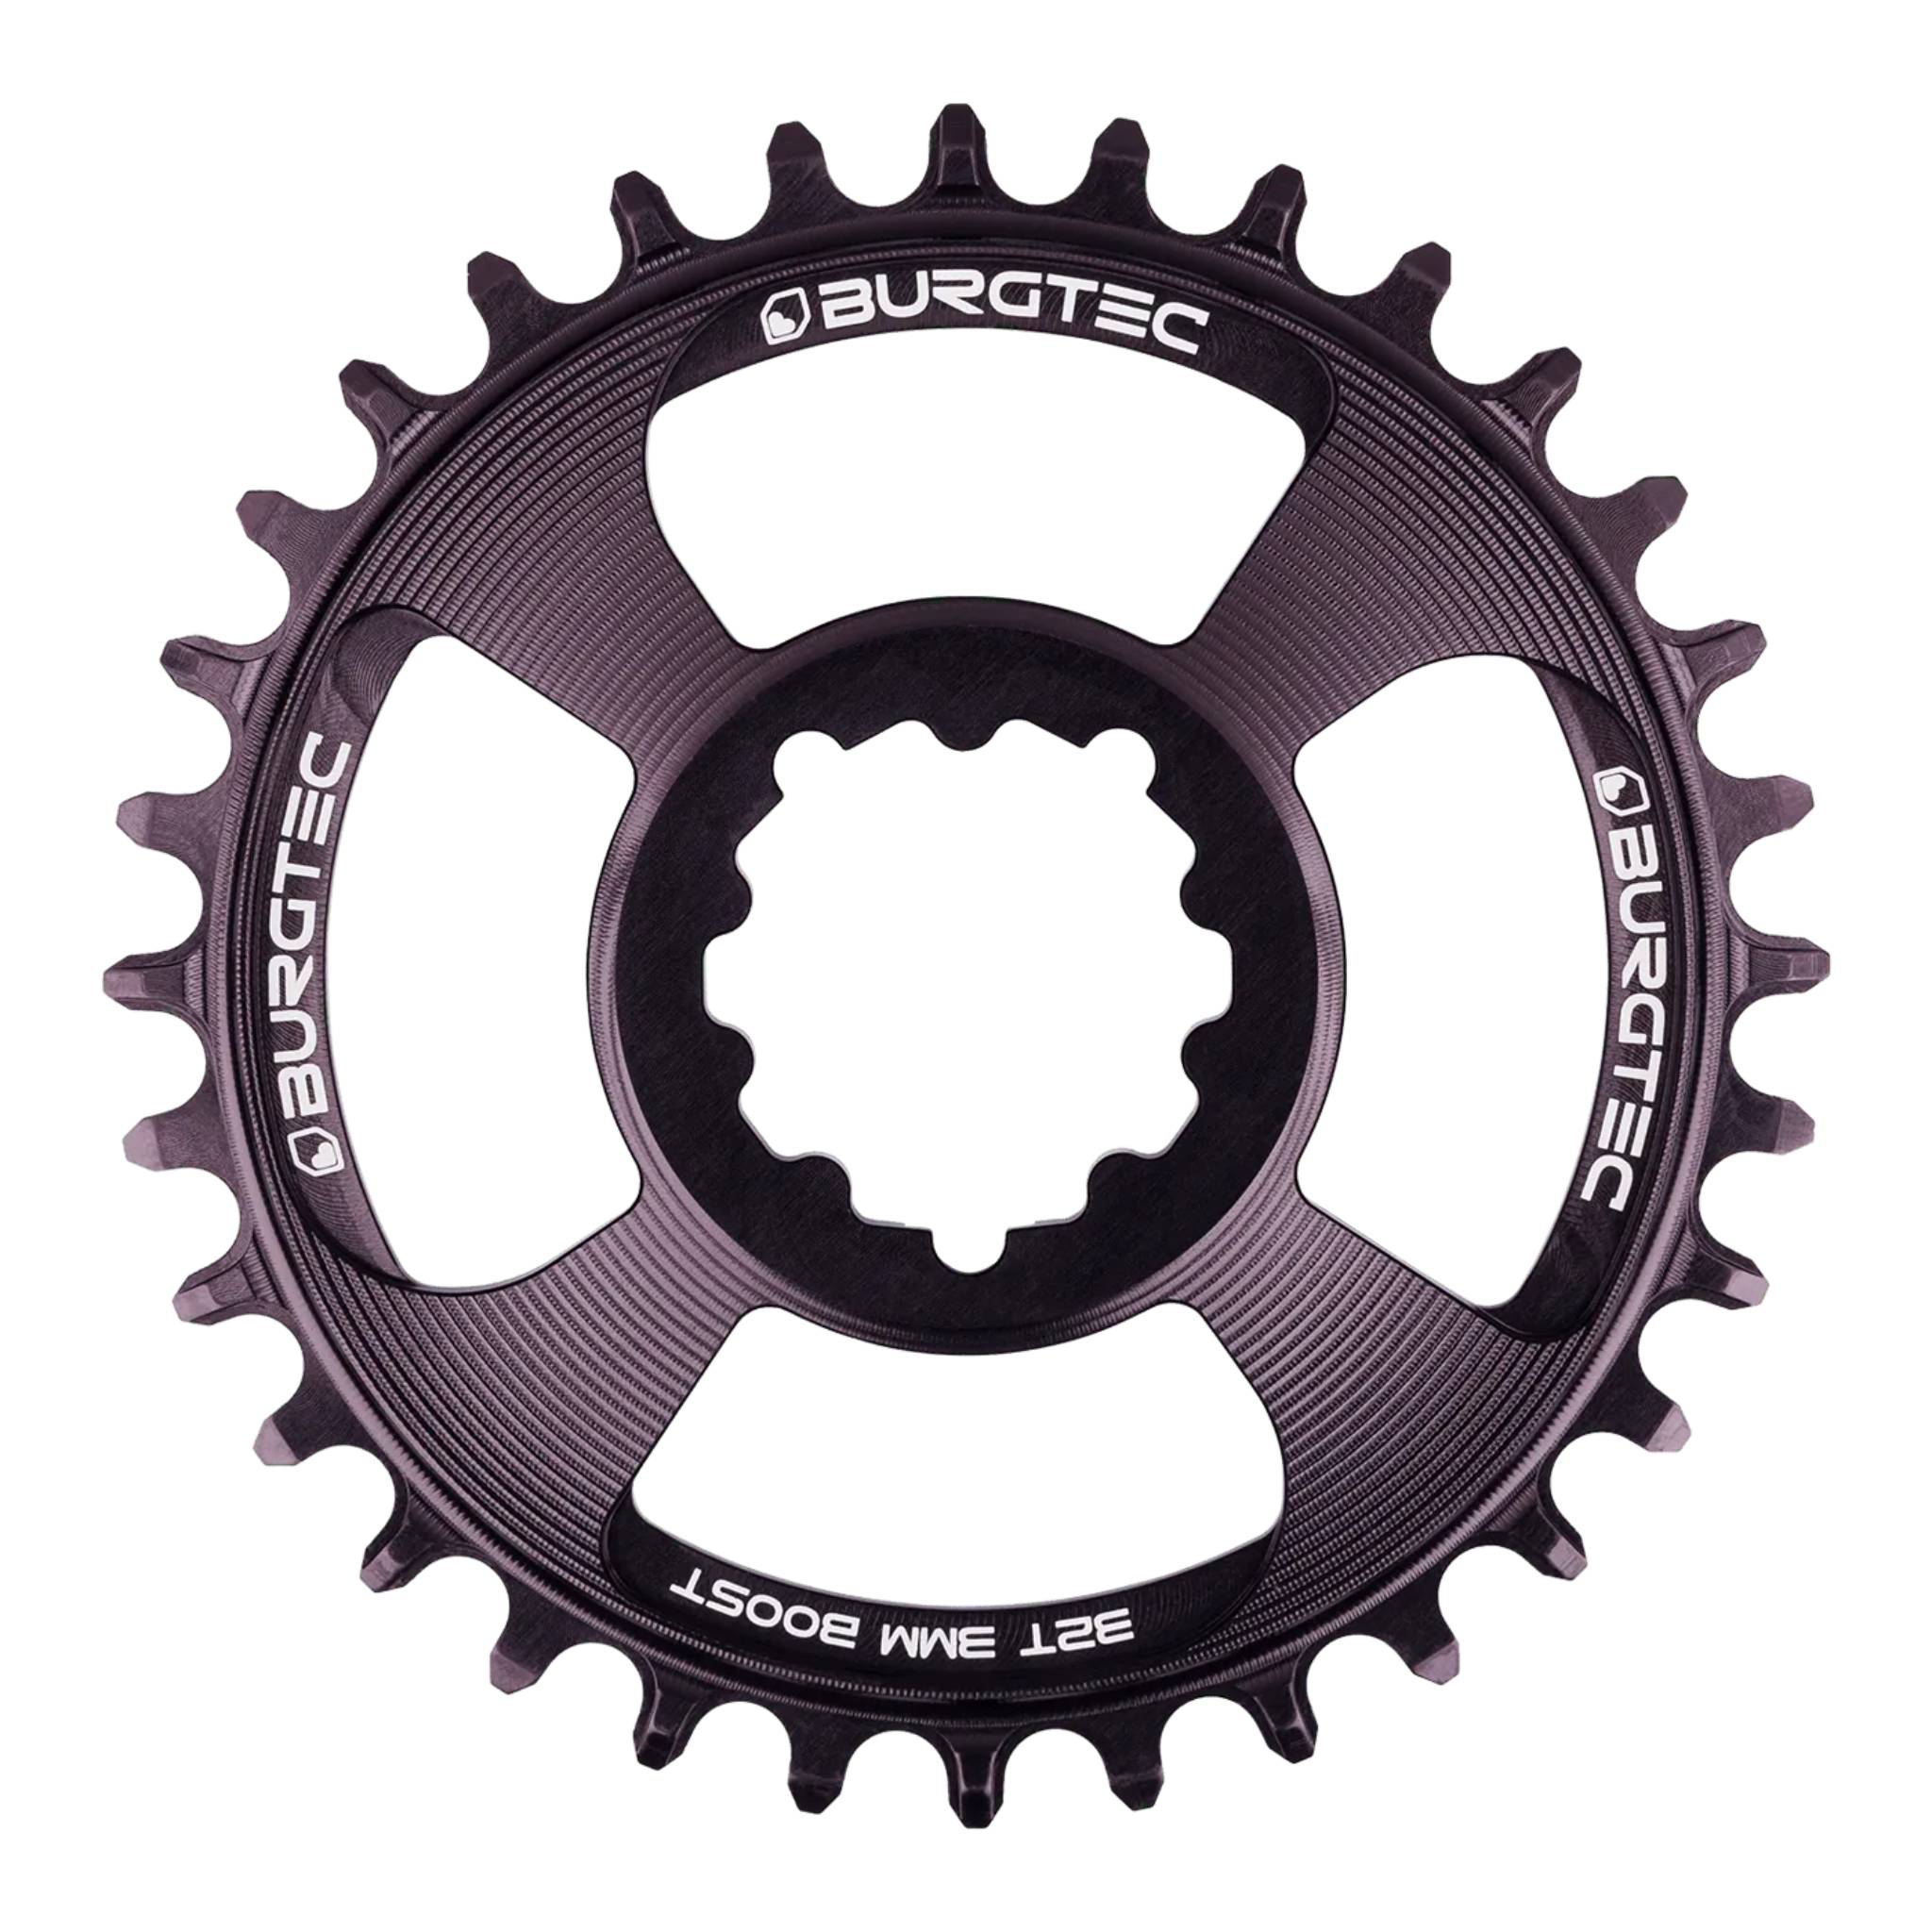 Burgtec Chainring - SRAM GXP Boost 3mm Offset Thick Thin